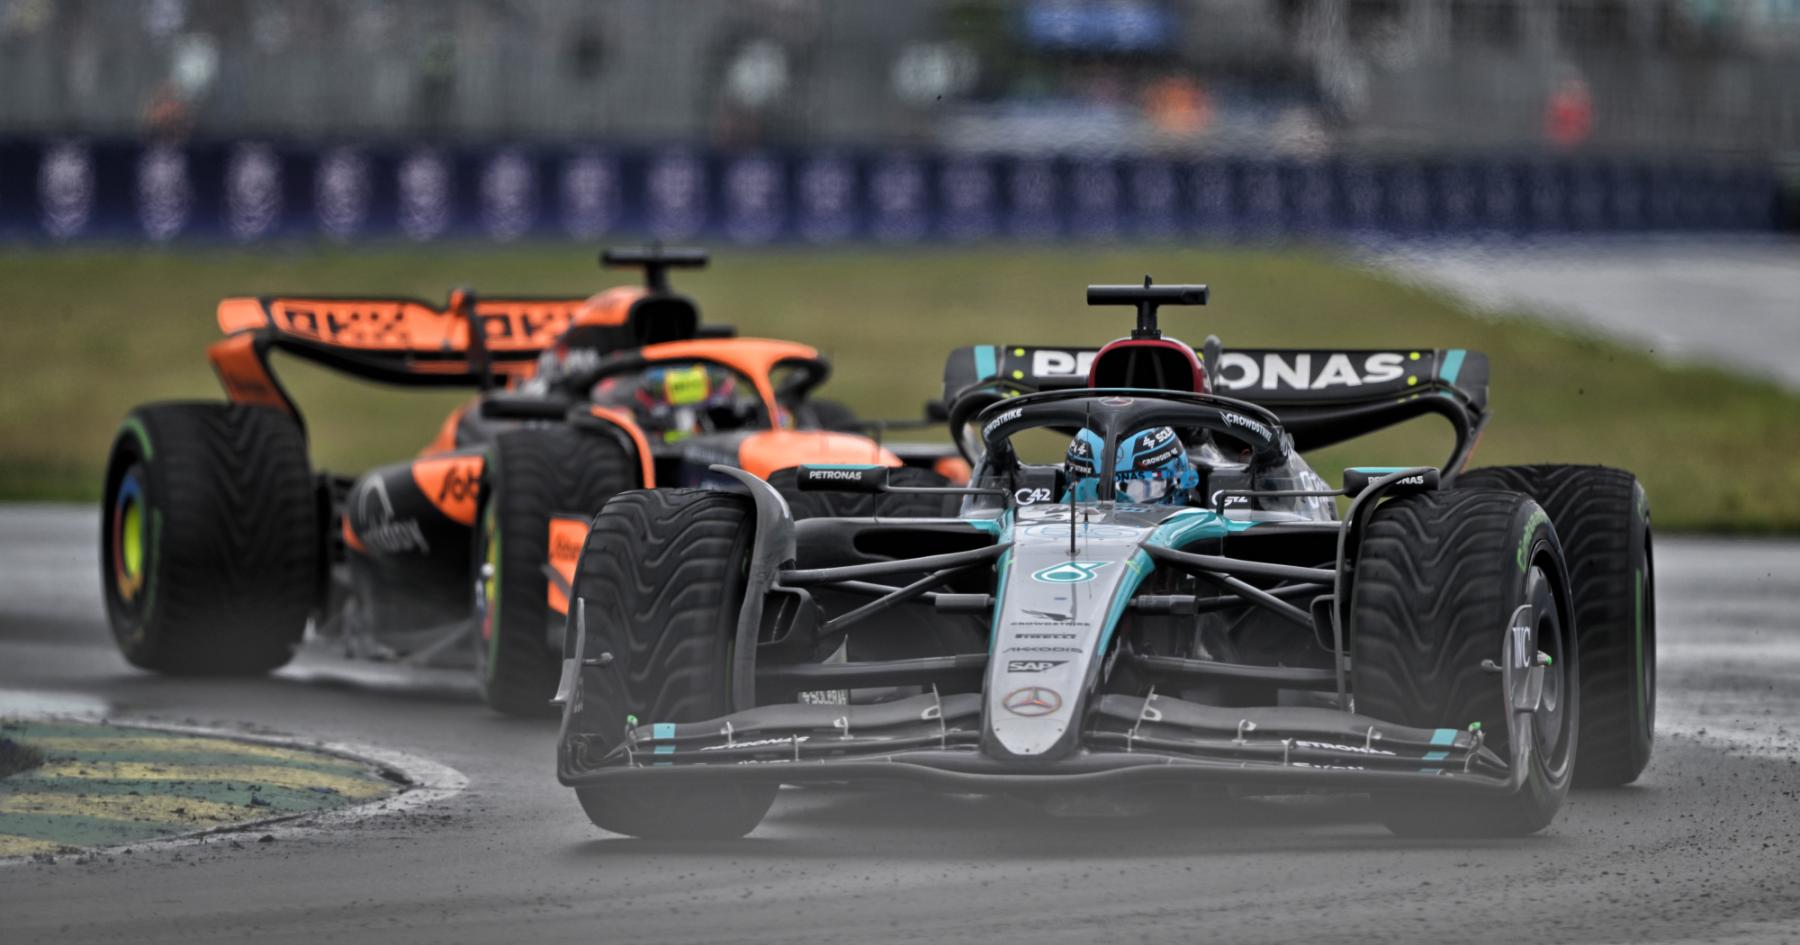 Stewards Summon Russell and Others for Inquiry After Canadian Grand Prix